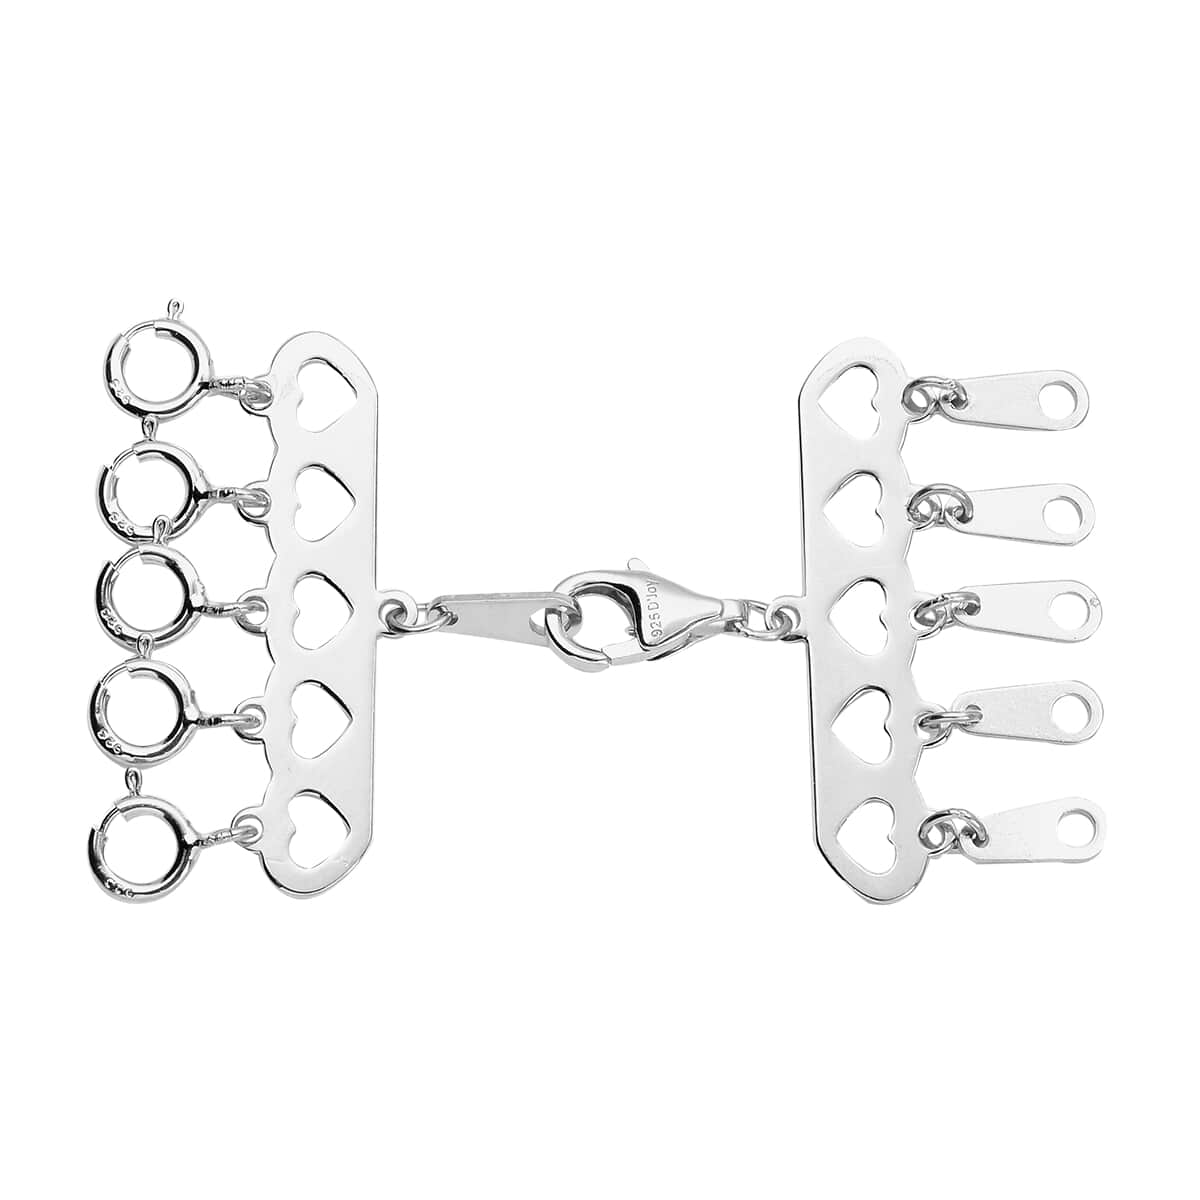 5 Row Hearts Layering Lock in Rhodium Over Sterling Silver with 9mm Lobster Lock and 5pcs 5mm Spring Locks , Jewelry Lock , Jewelry Closure , Lobster Clasp Closure image number 0